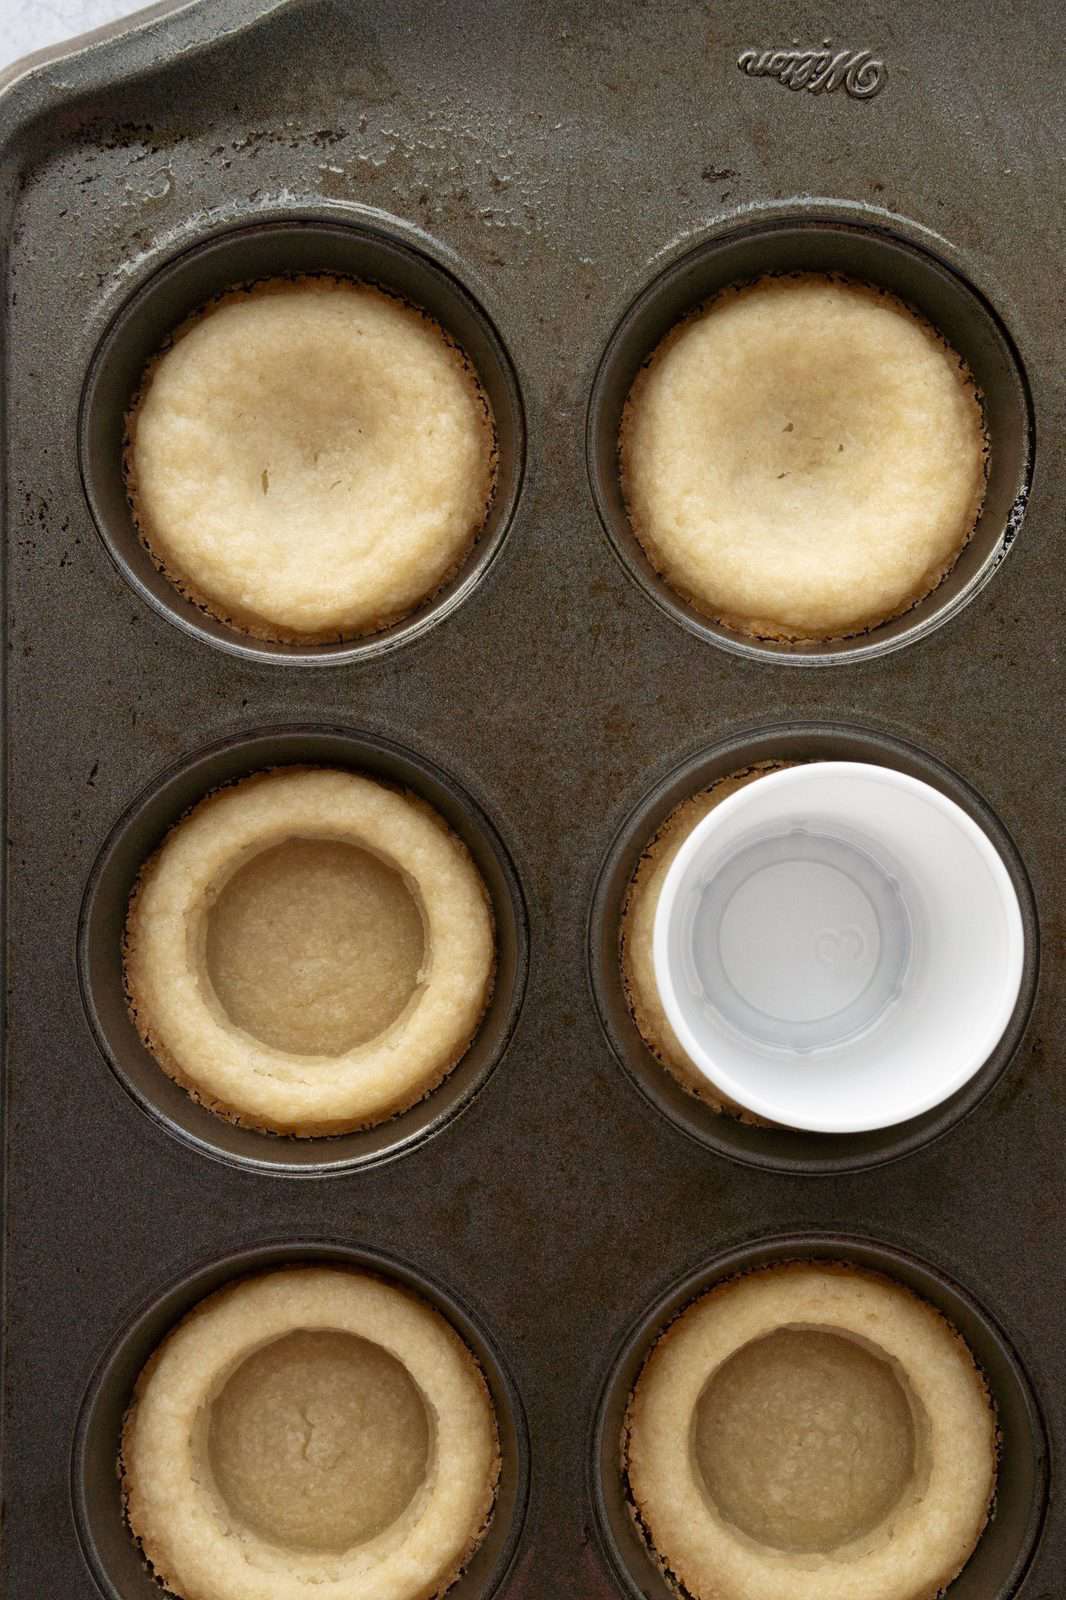 Baked cookie dough out of oven with shot glass pressing down to reshape the cookie cups.